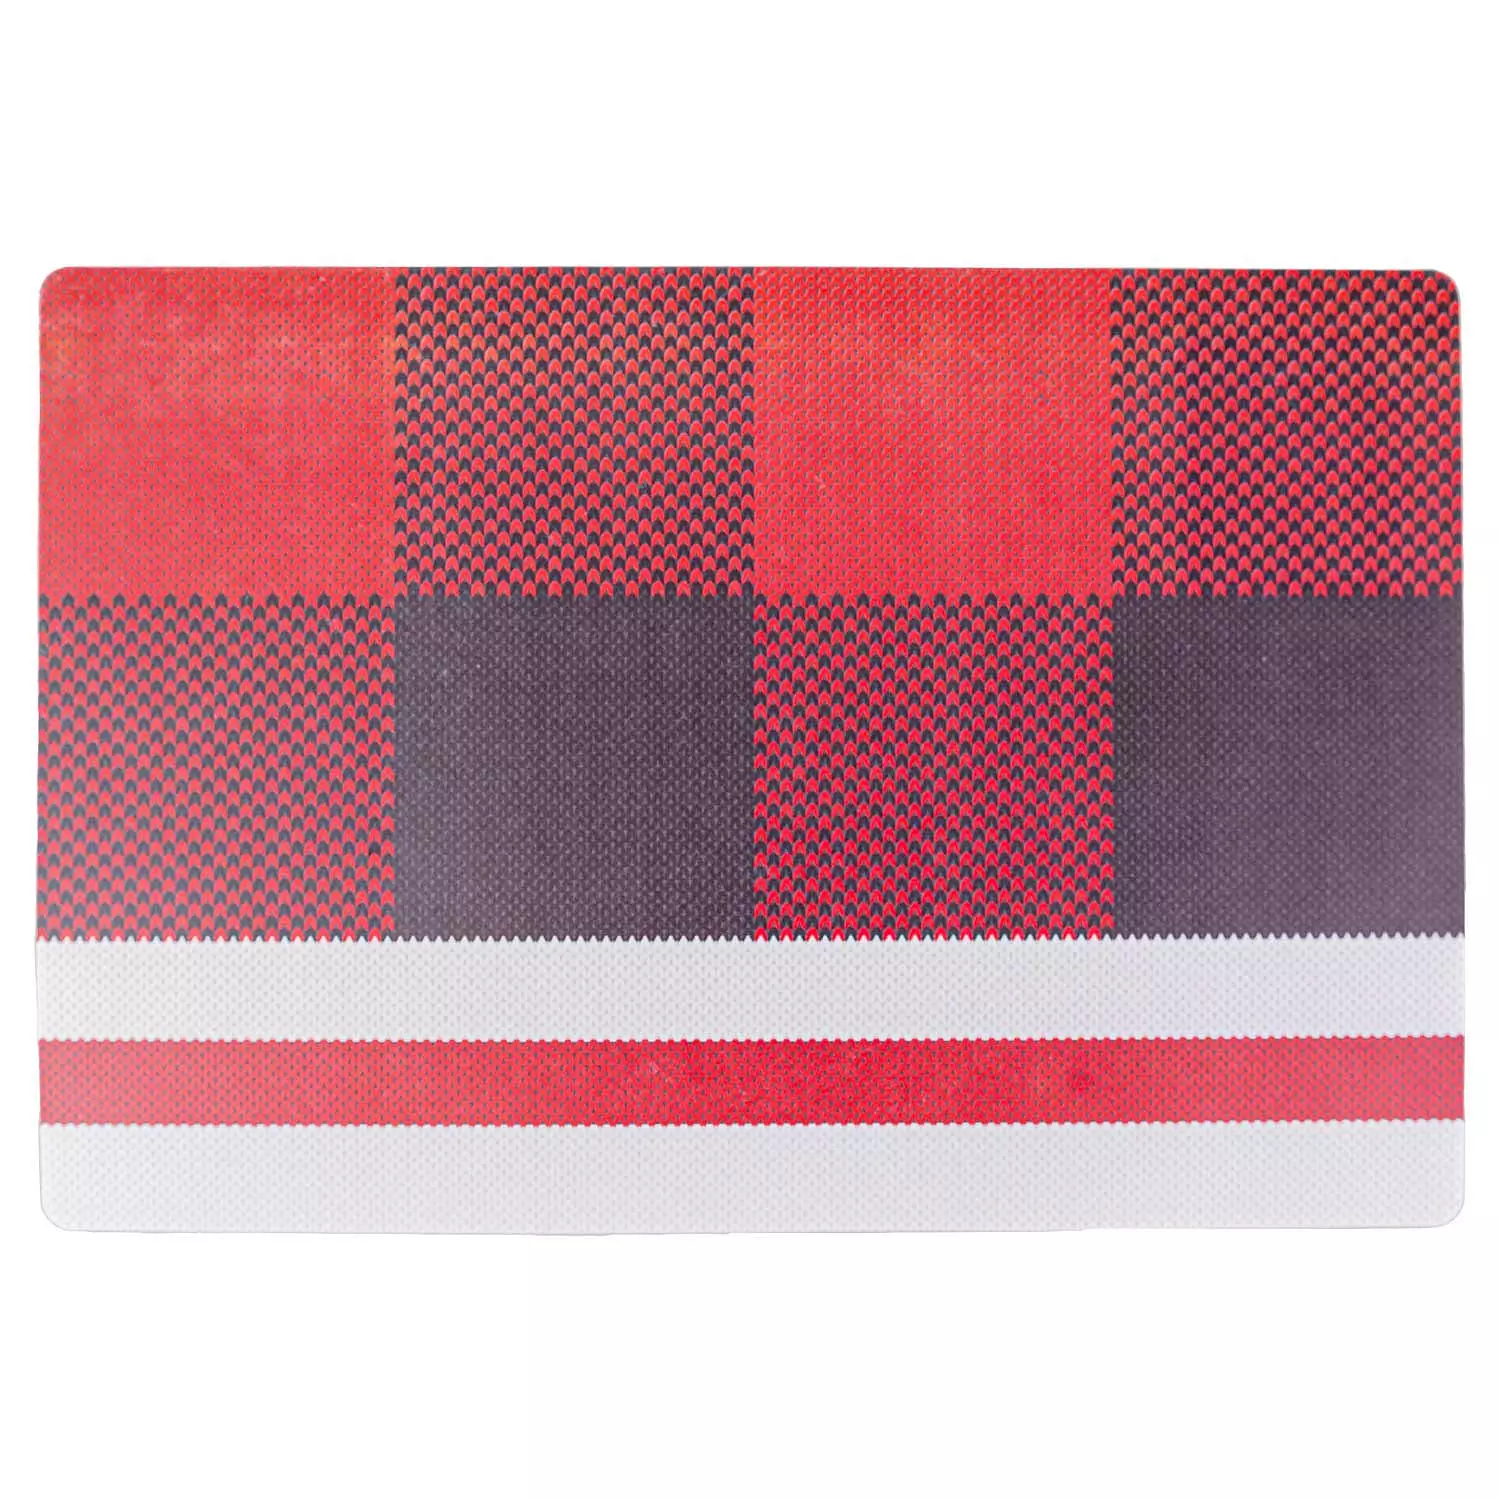 Polypropylene placemat, red and black plaid with stripe, 13"x19"